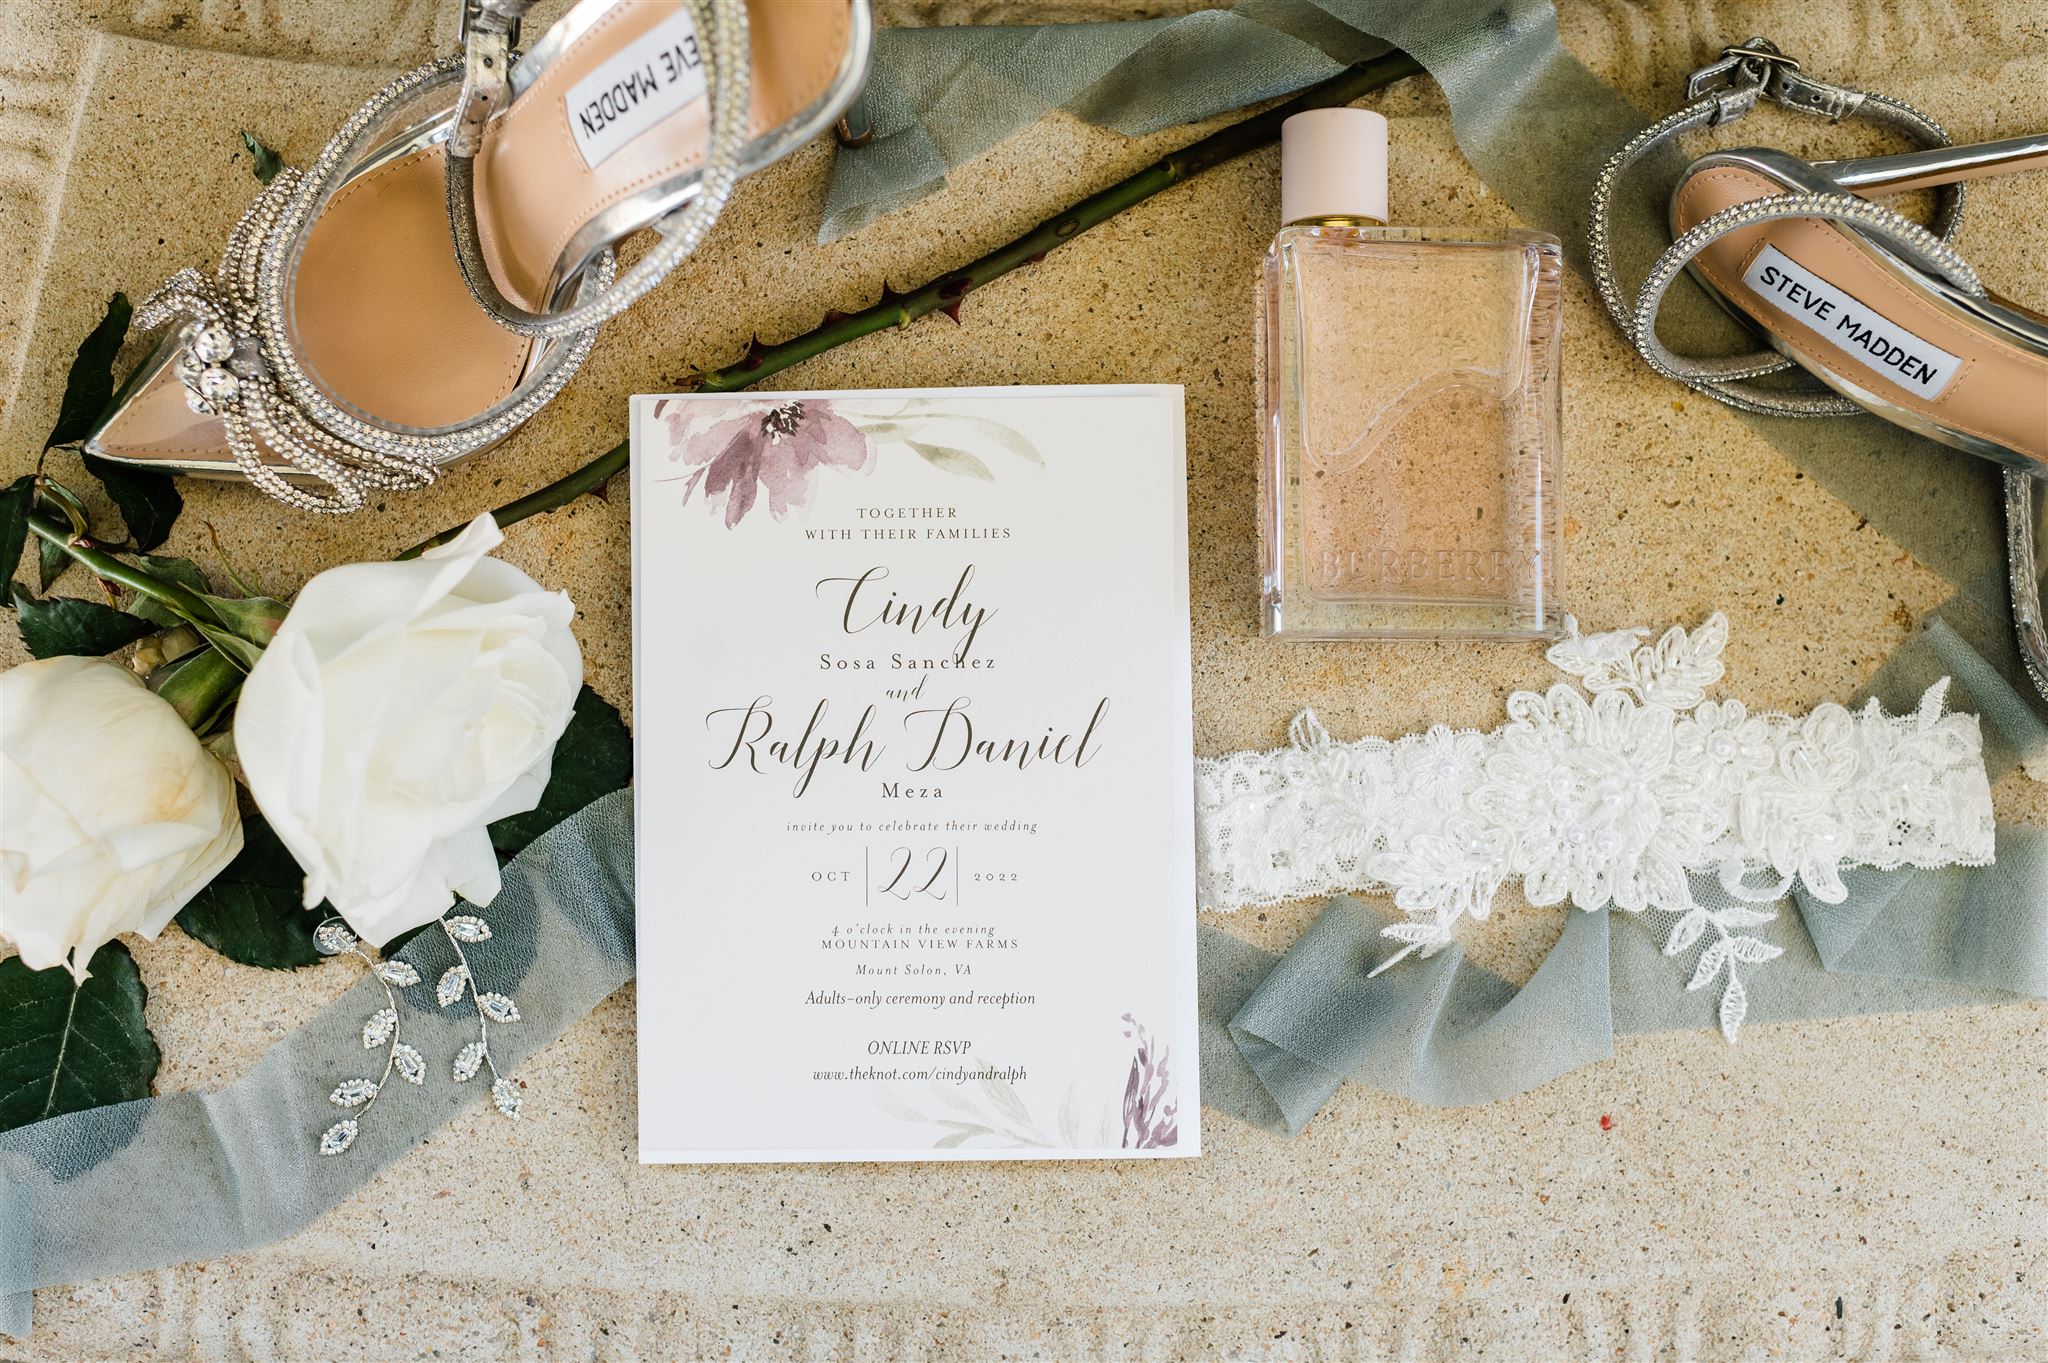 Shenandoah wedding flatlay photos with light pastel colors and natural textures